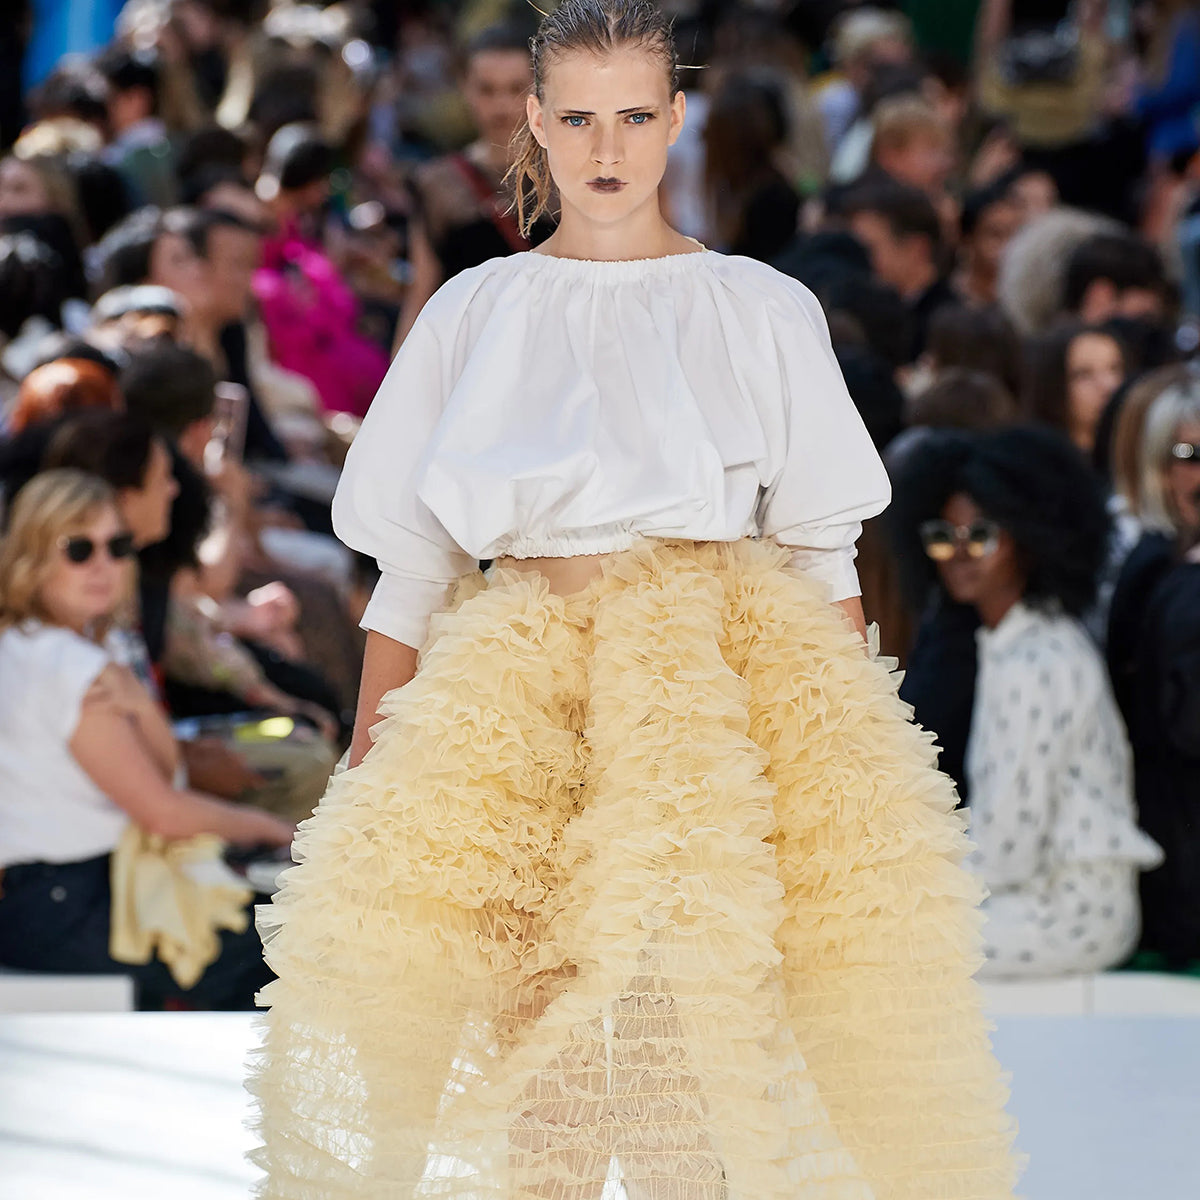 model wearing structured top and dramatic tulle skirts